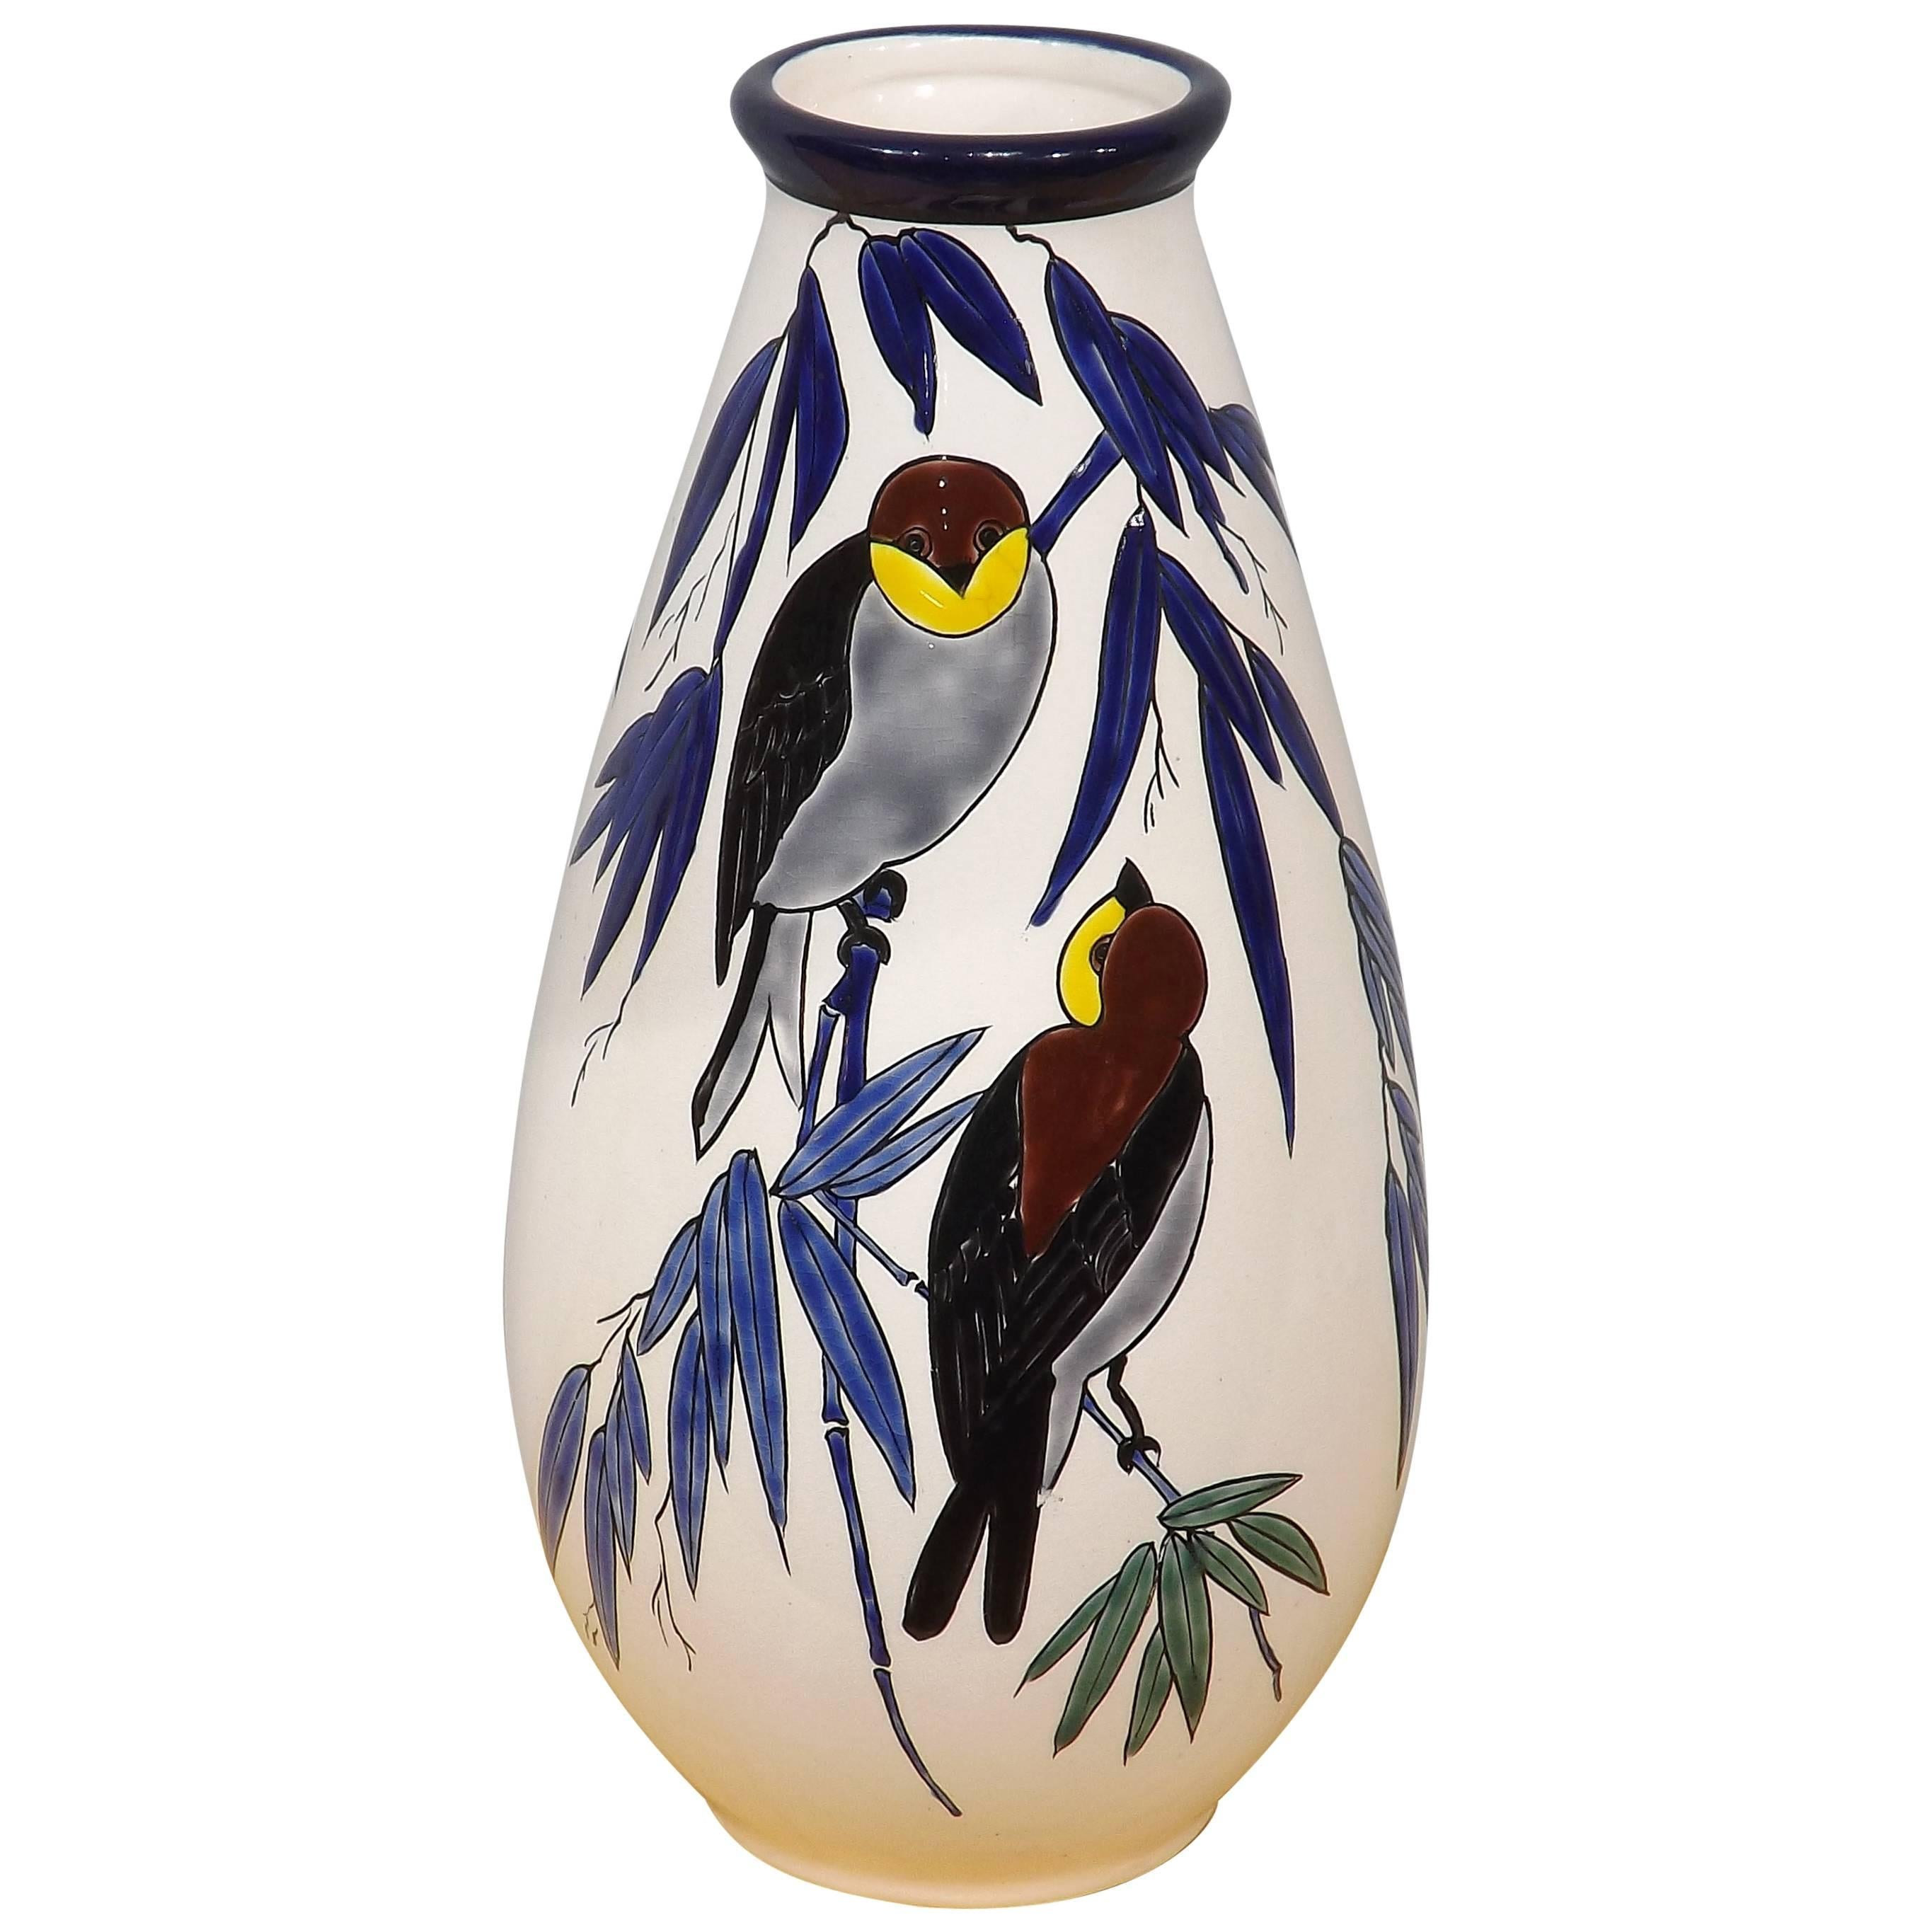 Boch Freres Swallow Vase by Charles Catteau